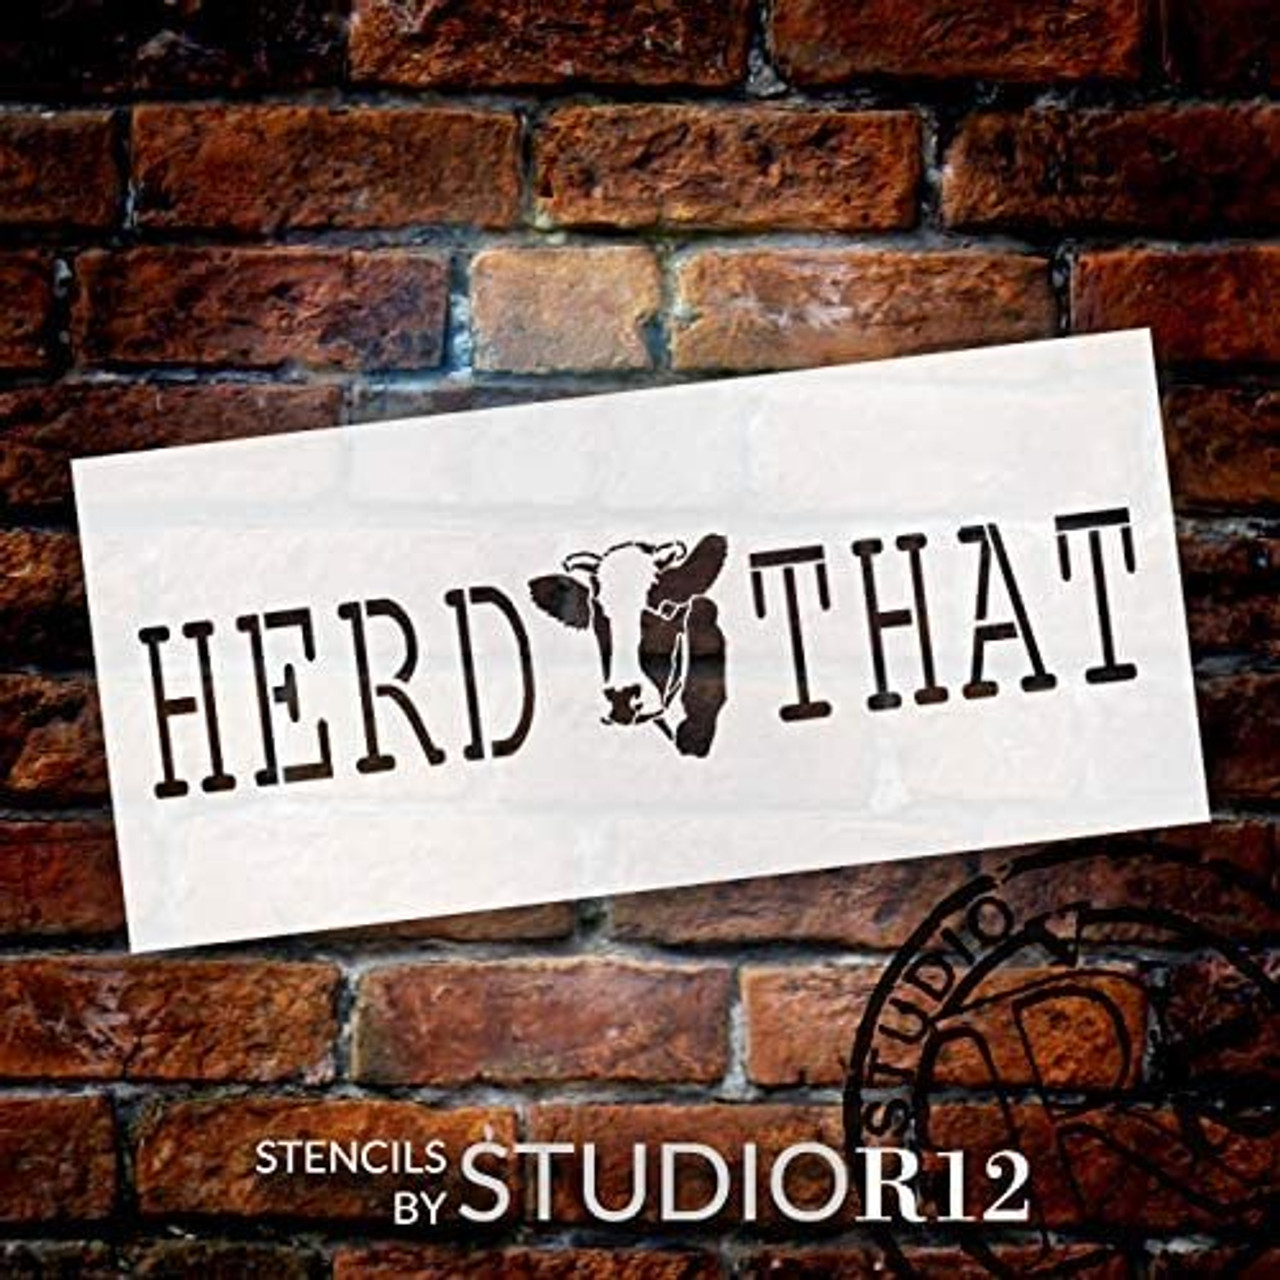 Herd That Stencil by StudioR12 | DIY Funny Cow Farmhouse Home Decor | Craft & Paint Wood Sign | Reusable Mylar Template | Country Heifer Barn Kitchen Gift